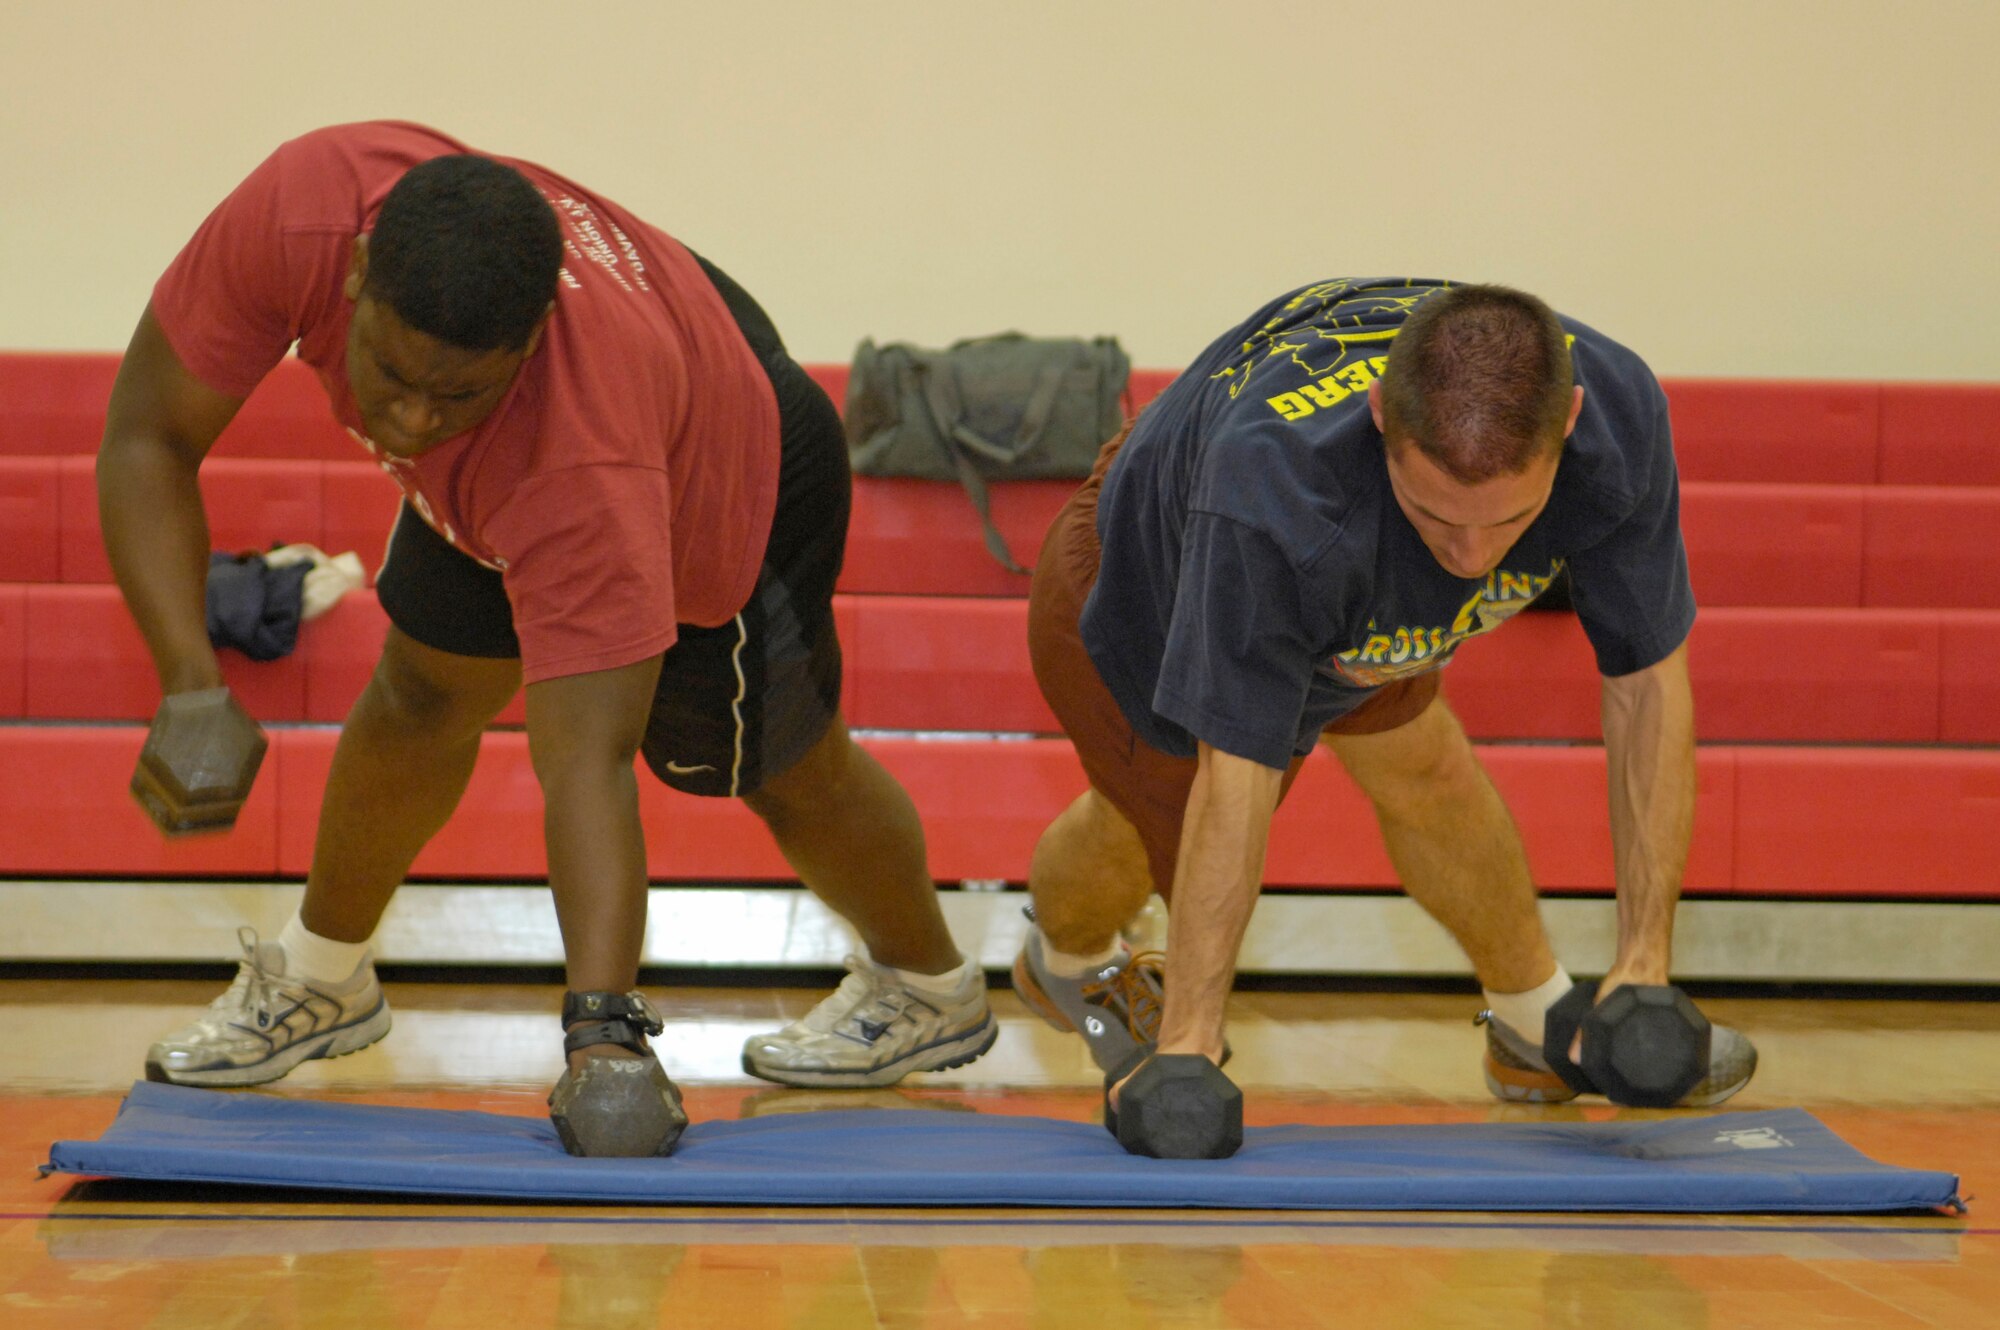 VANDENBERG AIR FORCE BASE, Calif. -- Working hard alongside each other, Sidney Wilkinson and Jason Christopher, both from the Space and Missiles Systems Center located at Los Angeles AFB, Calif., do push-up rolls with weights here during the Hardcore 30-Minute Workout here Wednesday, Jan. 6, 2010. The workout program is provided at the base fitness center at lunchtime from noon to 12:30 p.m. (U.S. Air Force photo/Airman 1st Class Andrew Lee)
 
 
 